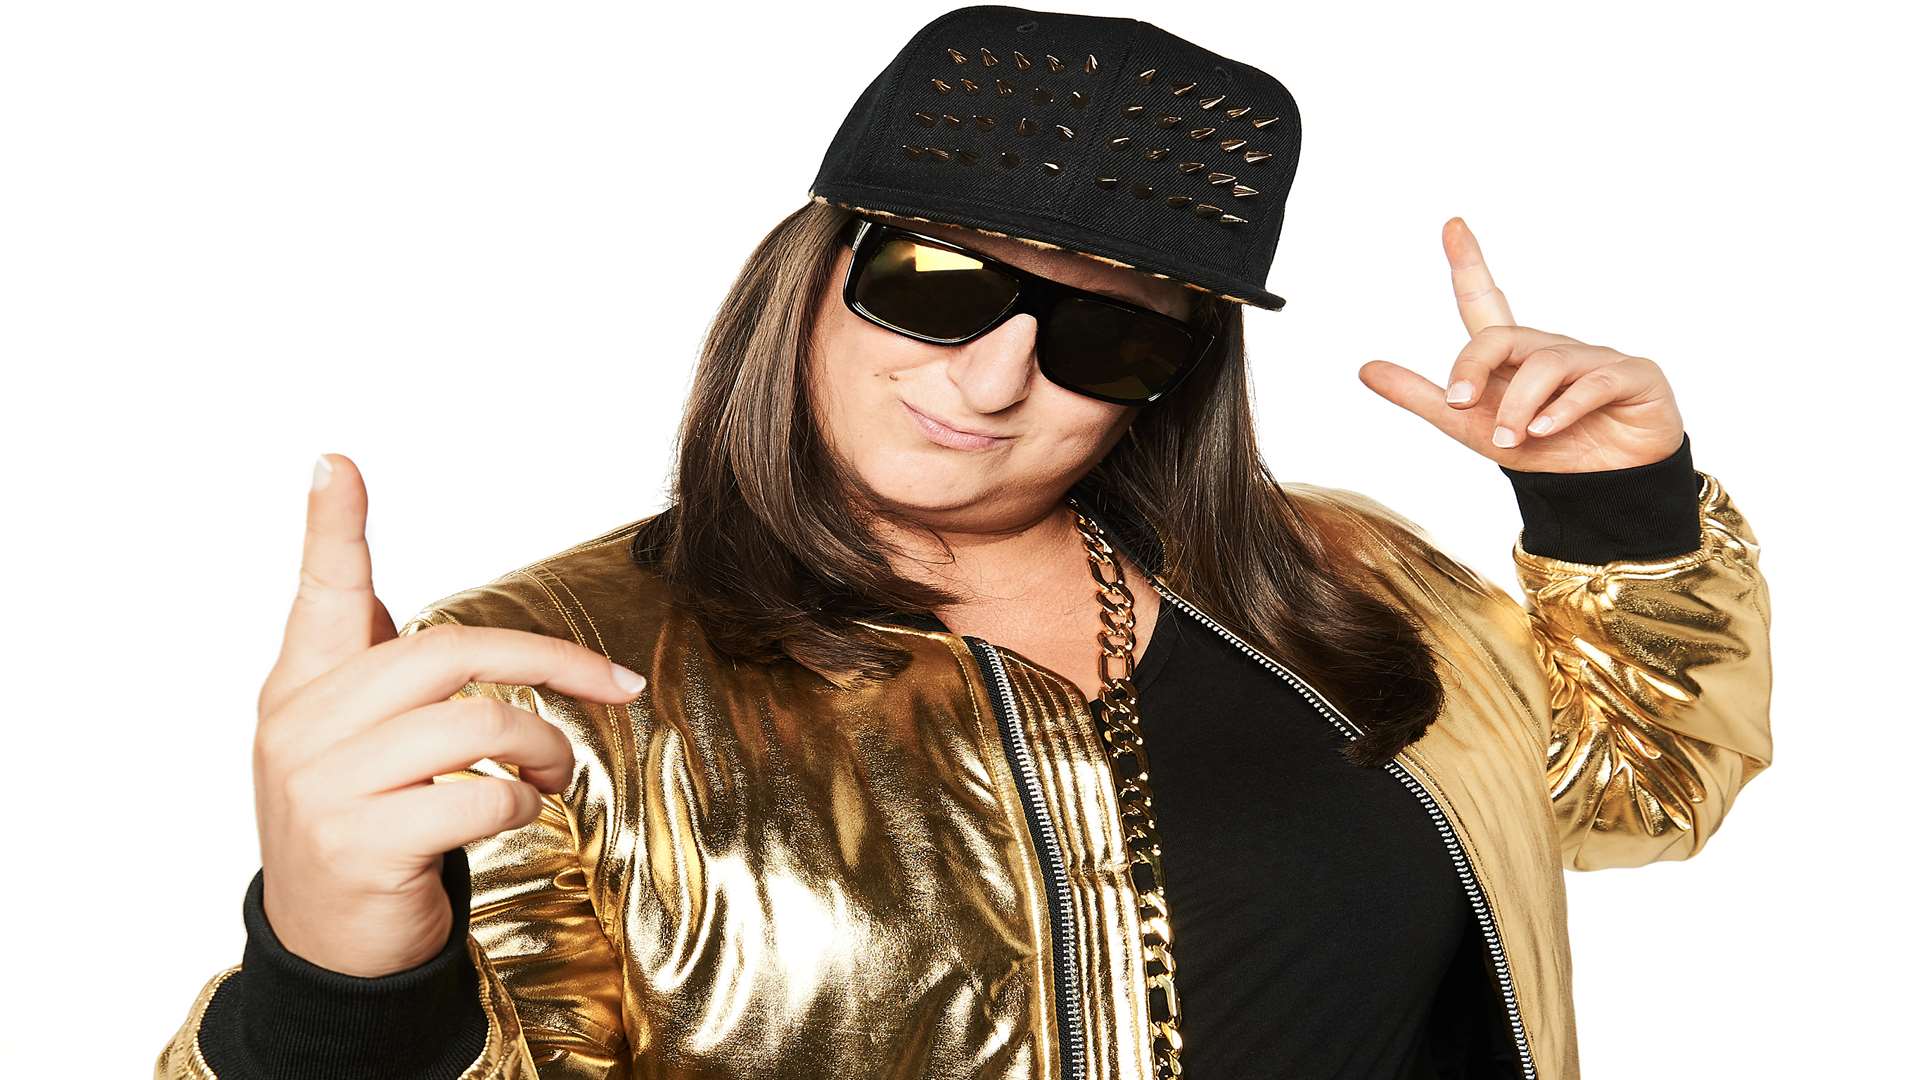 X Factor's Honey G has been on kmfm. Picture: Thames/Syco Entertainment